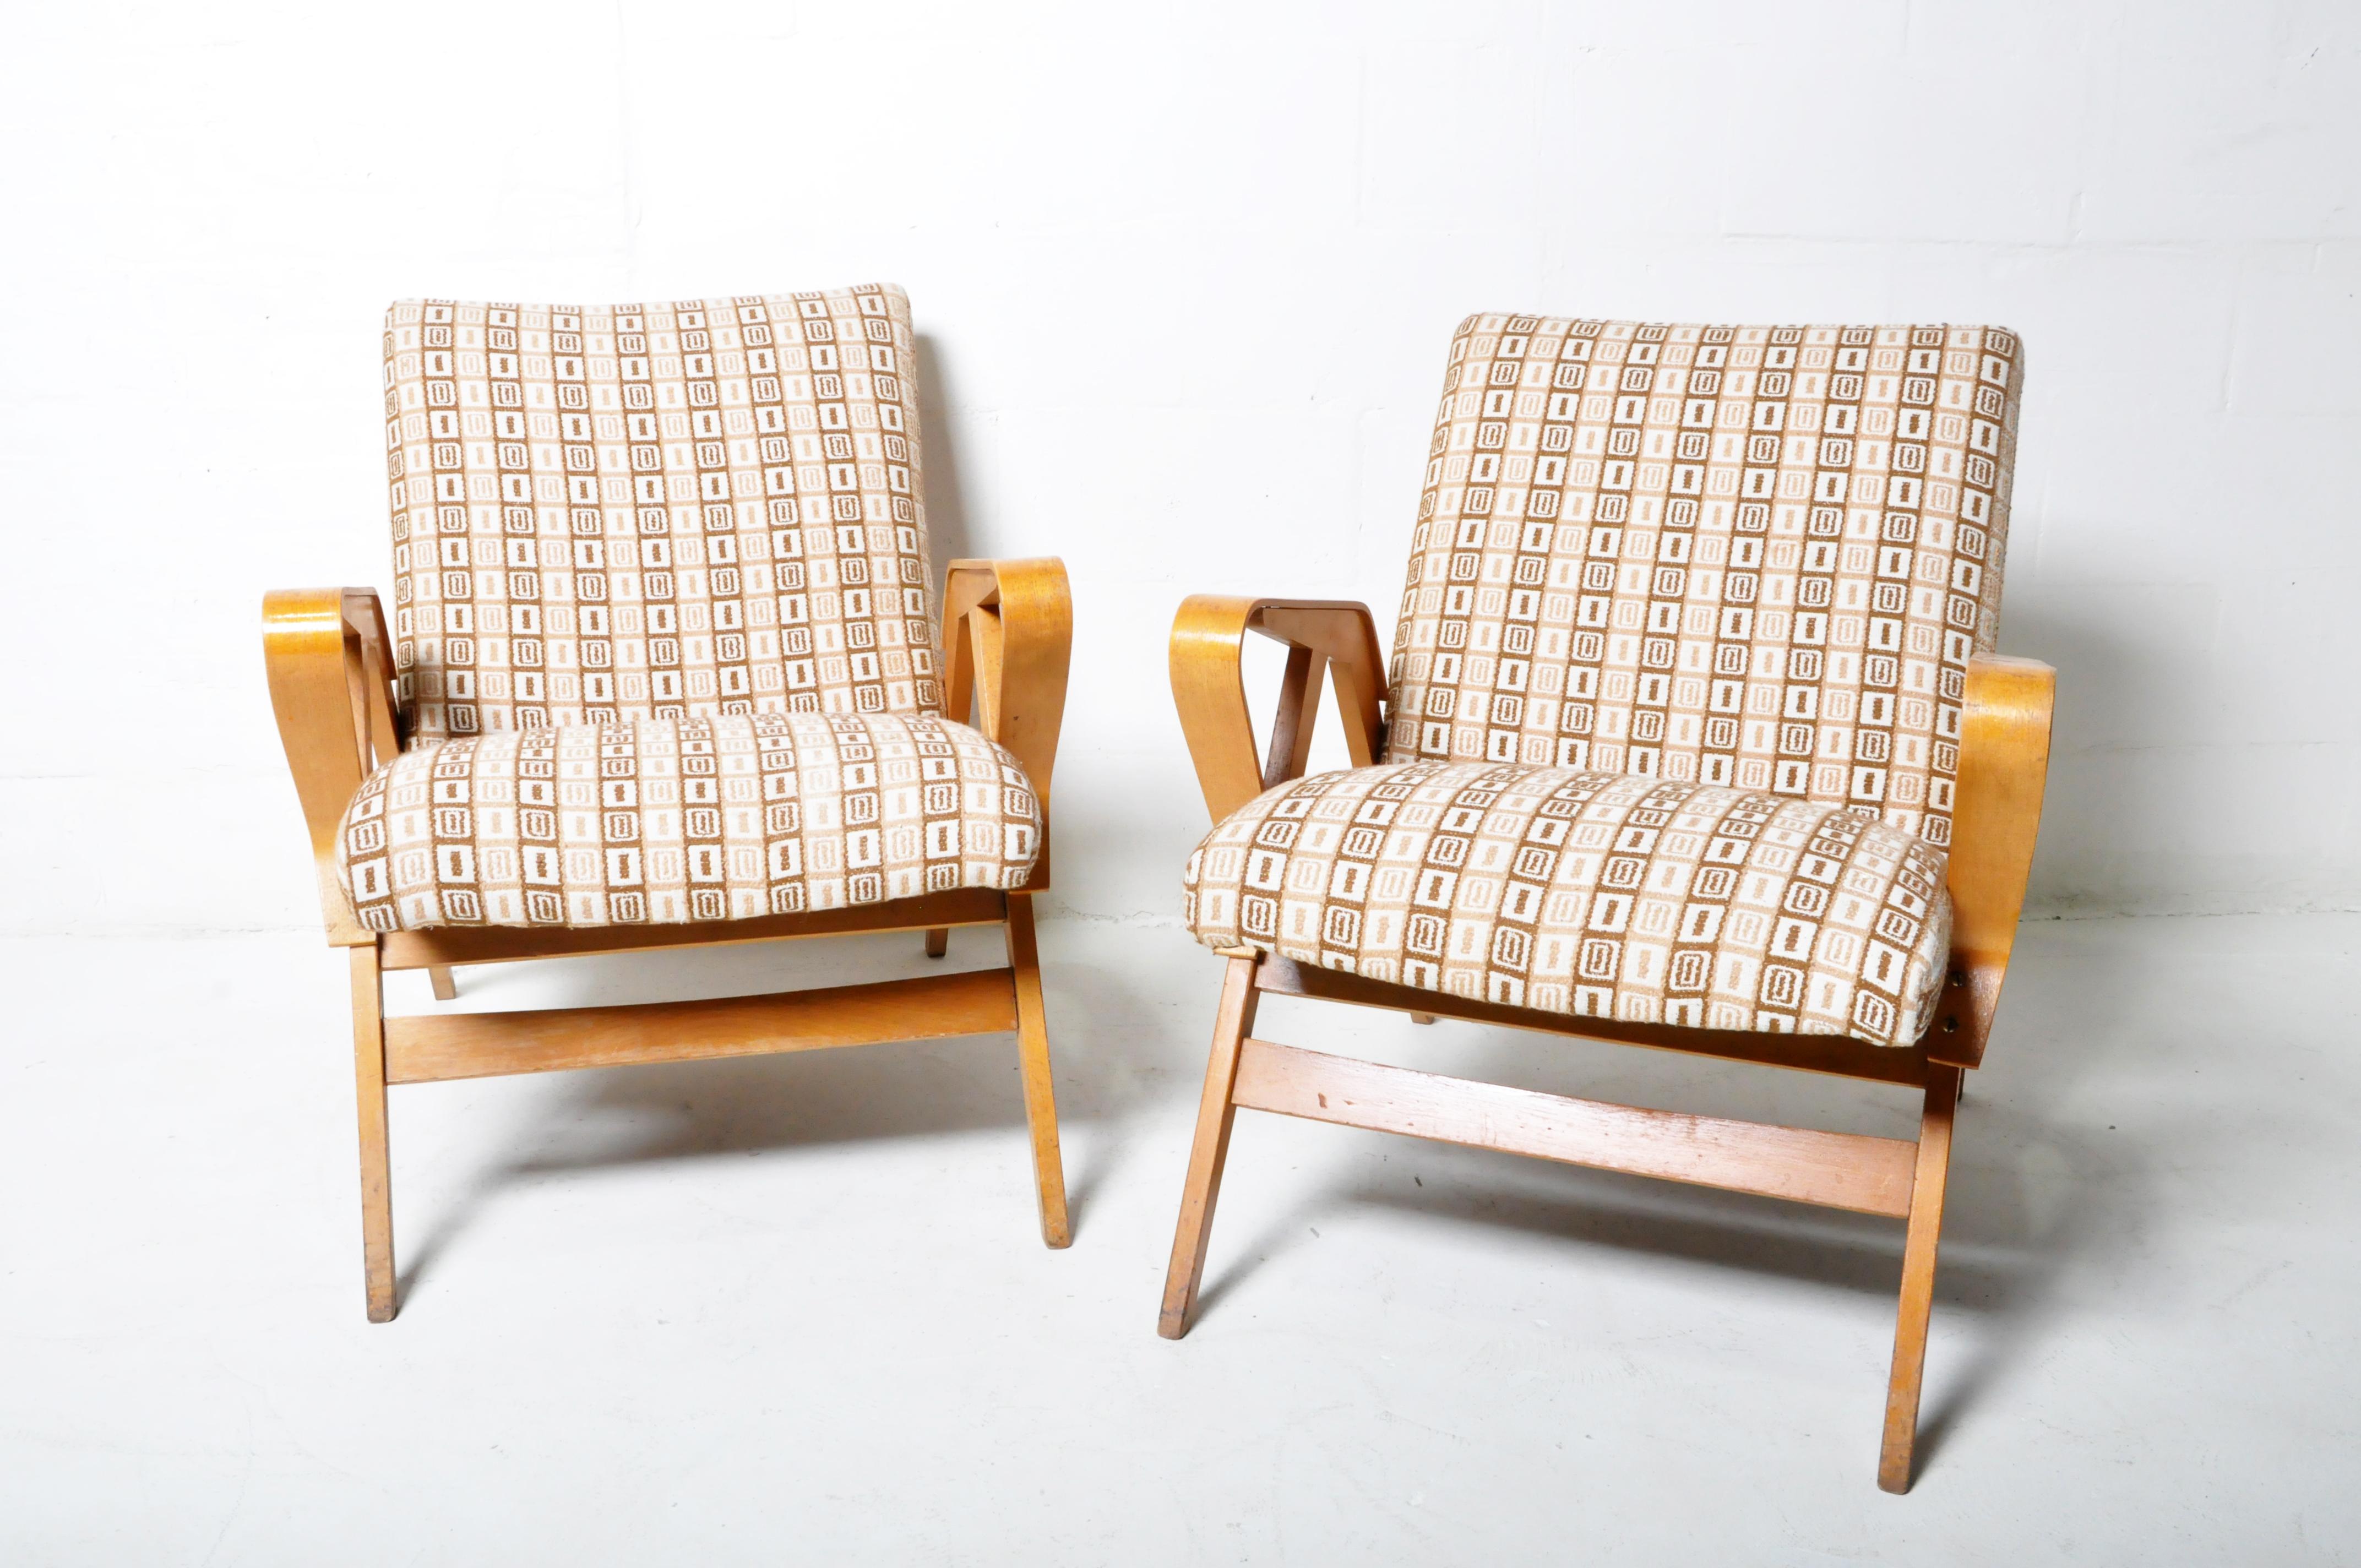 These Mid-Century Modern Czech lounge chairs are made from a solid poplar frame and have bent beechwood arms. They are typical of East-Block 